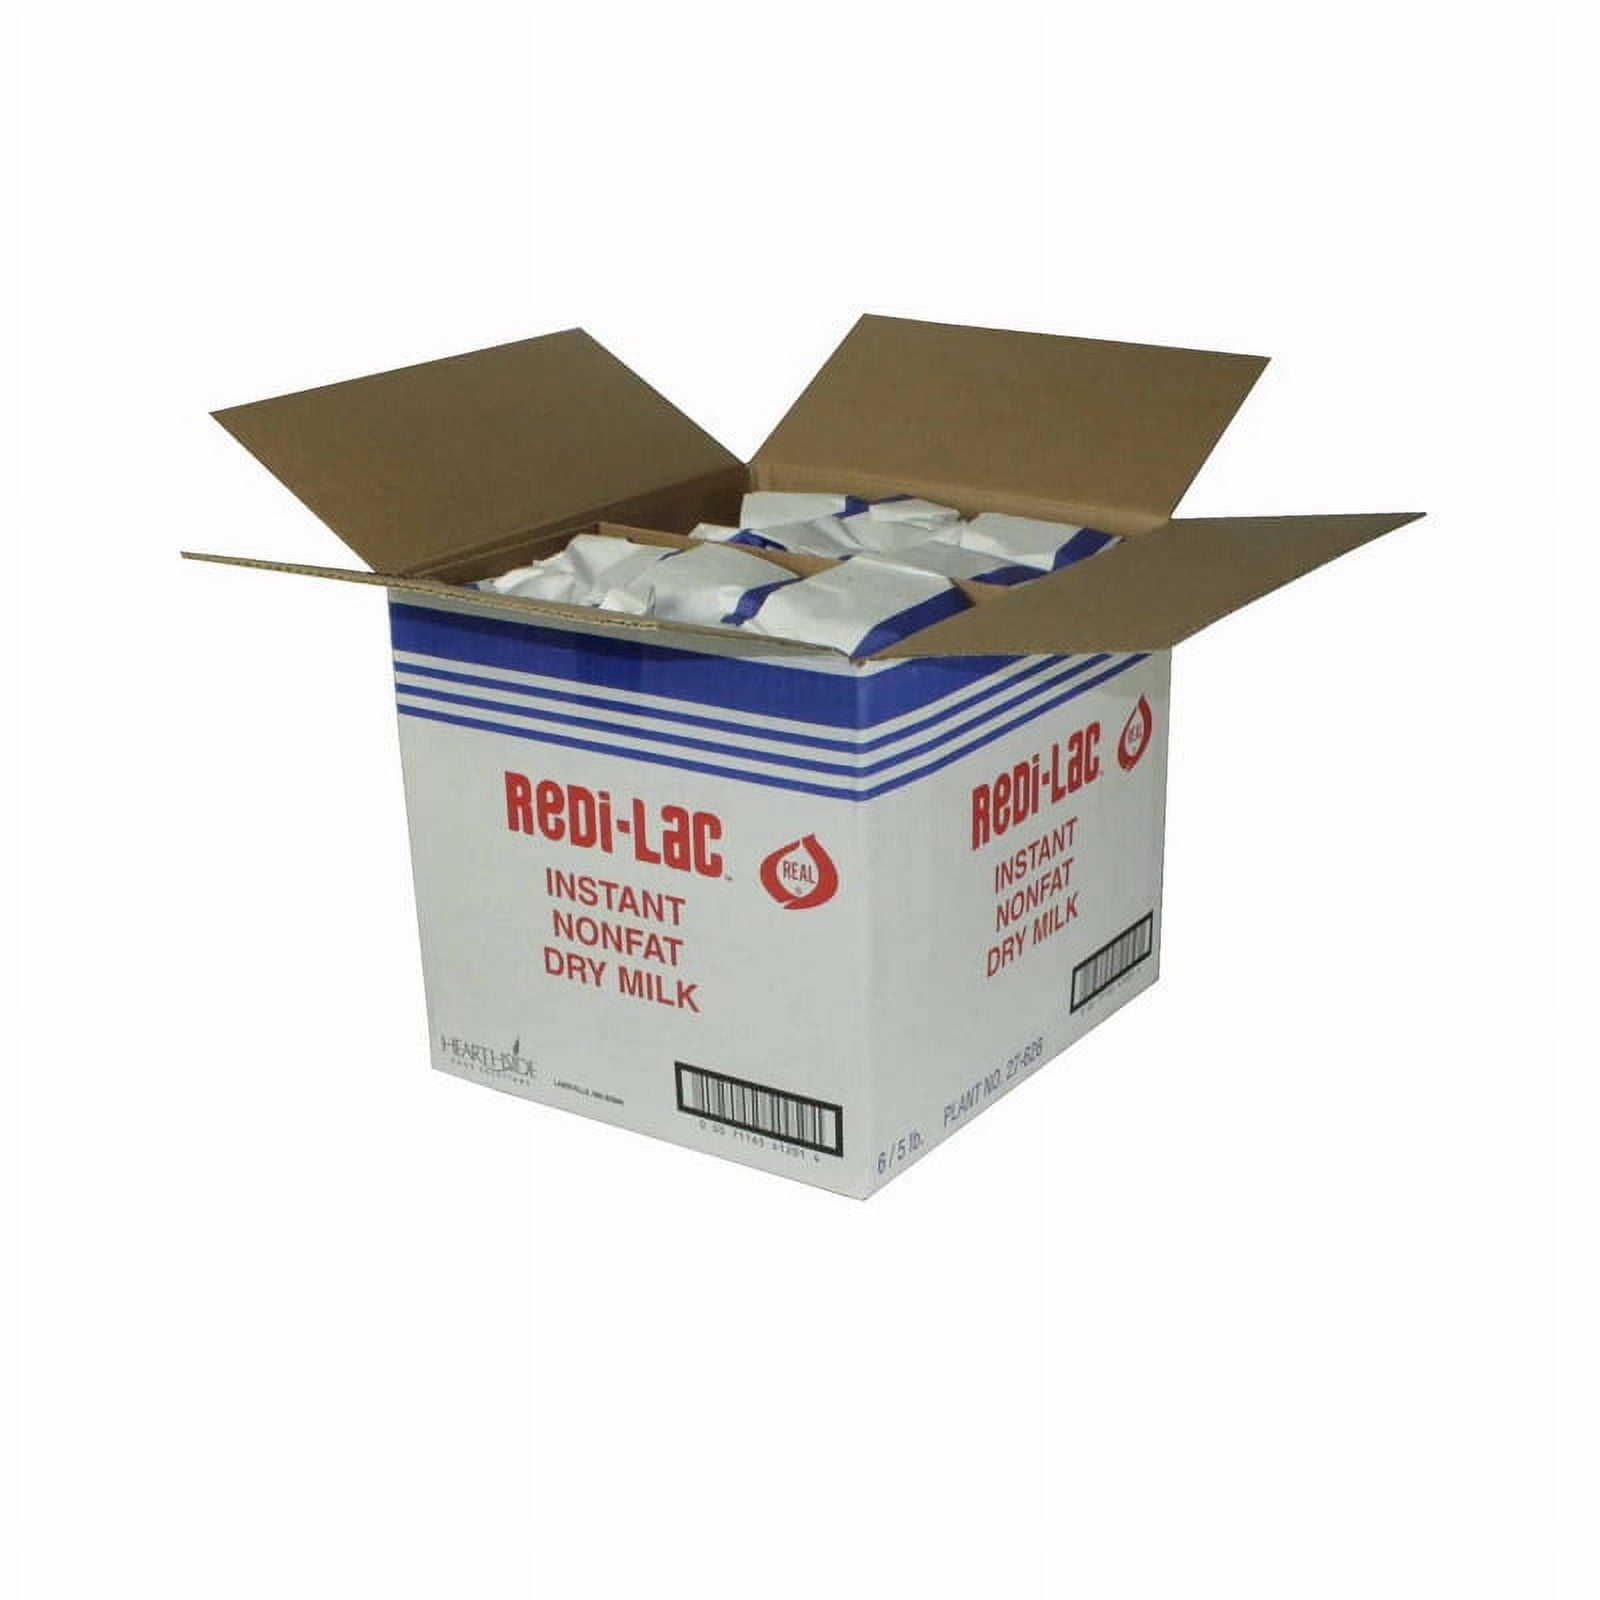 Redi-Box Moving Box Specifications